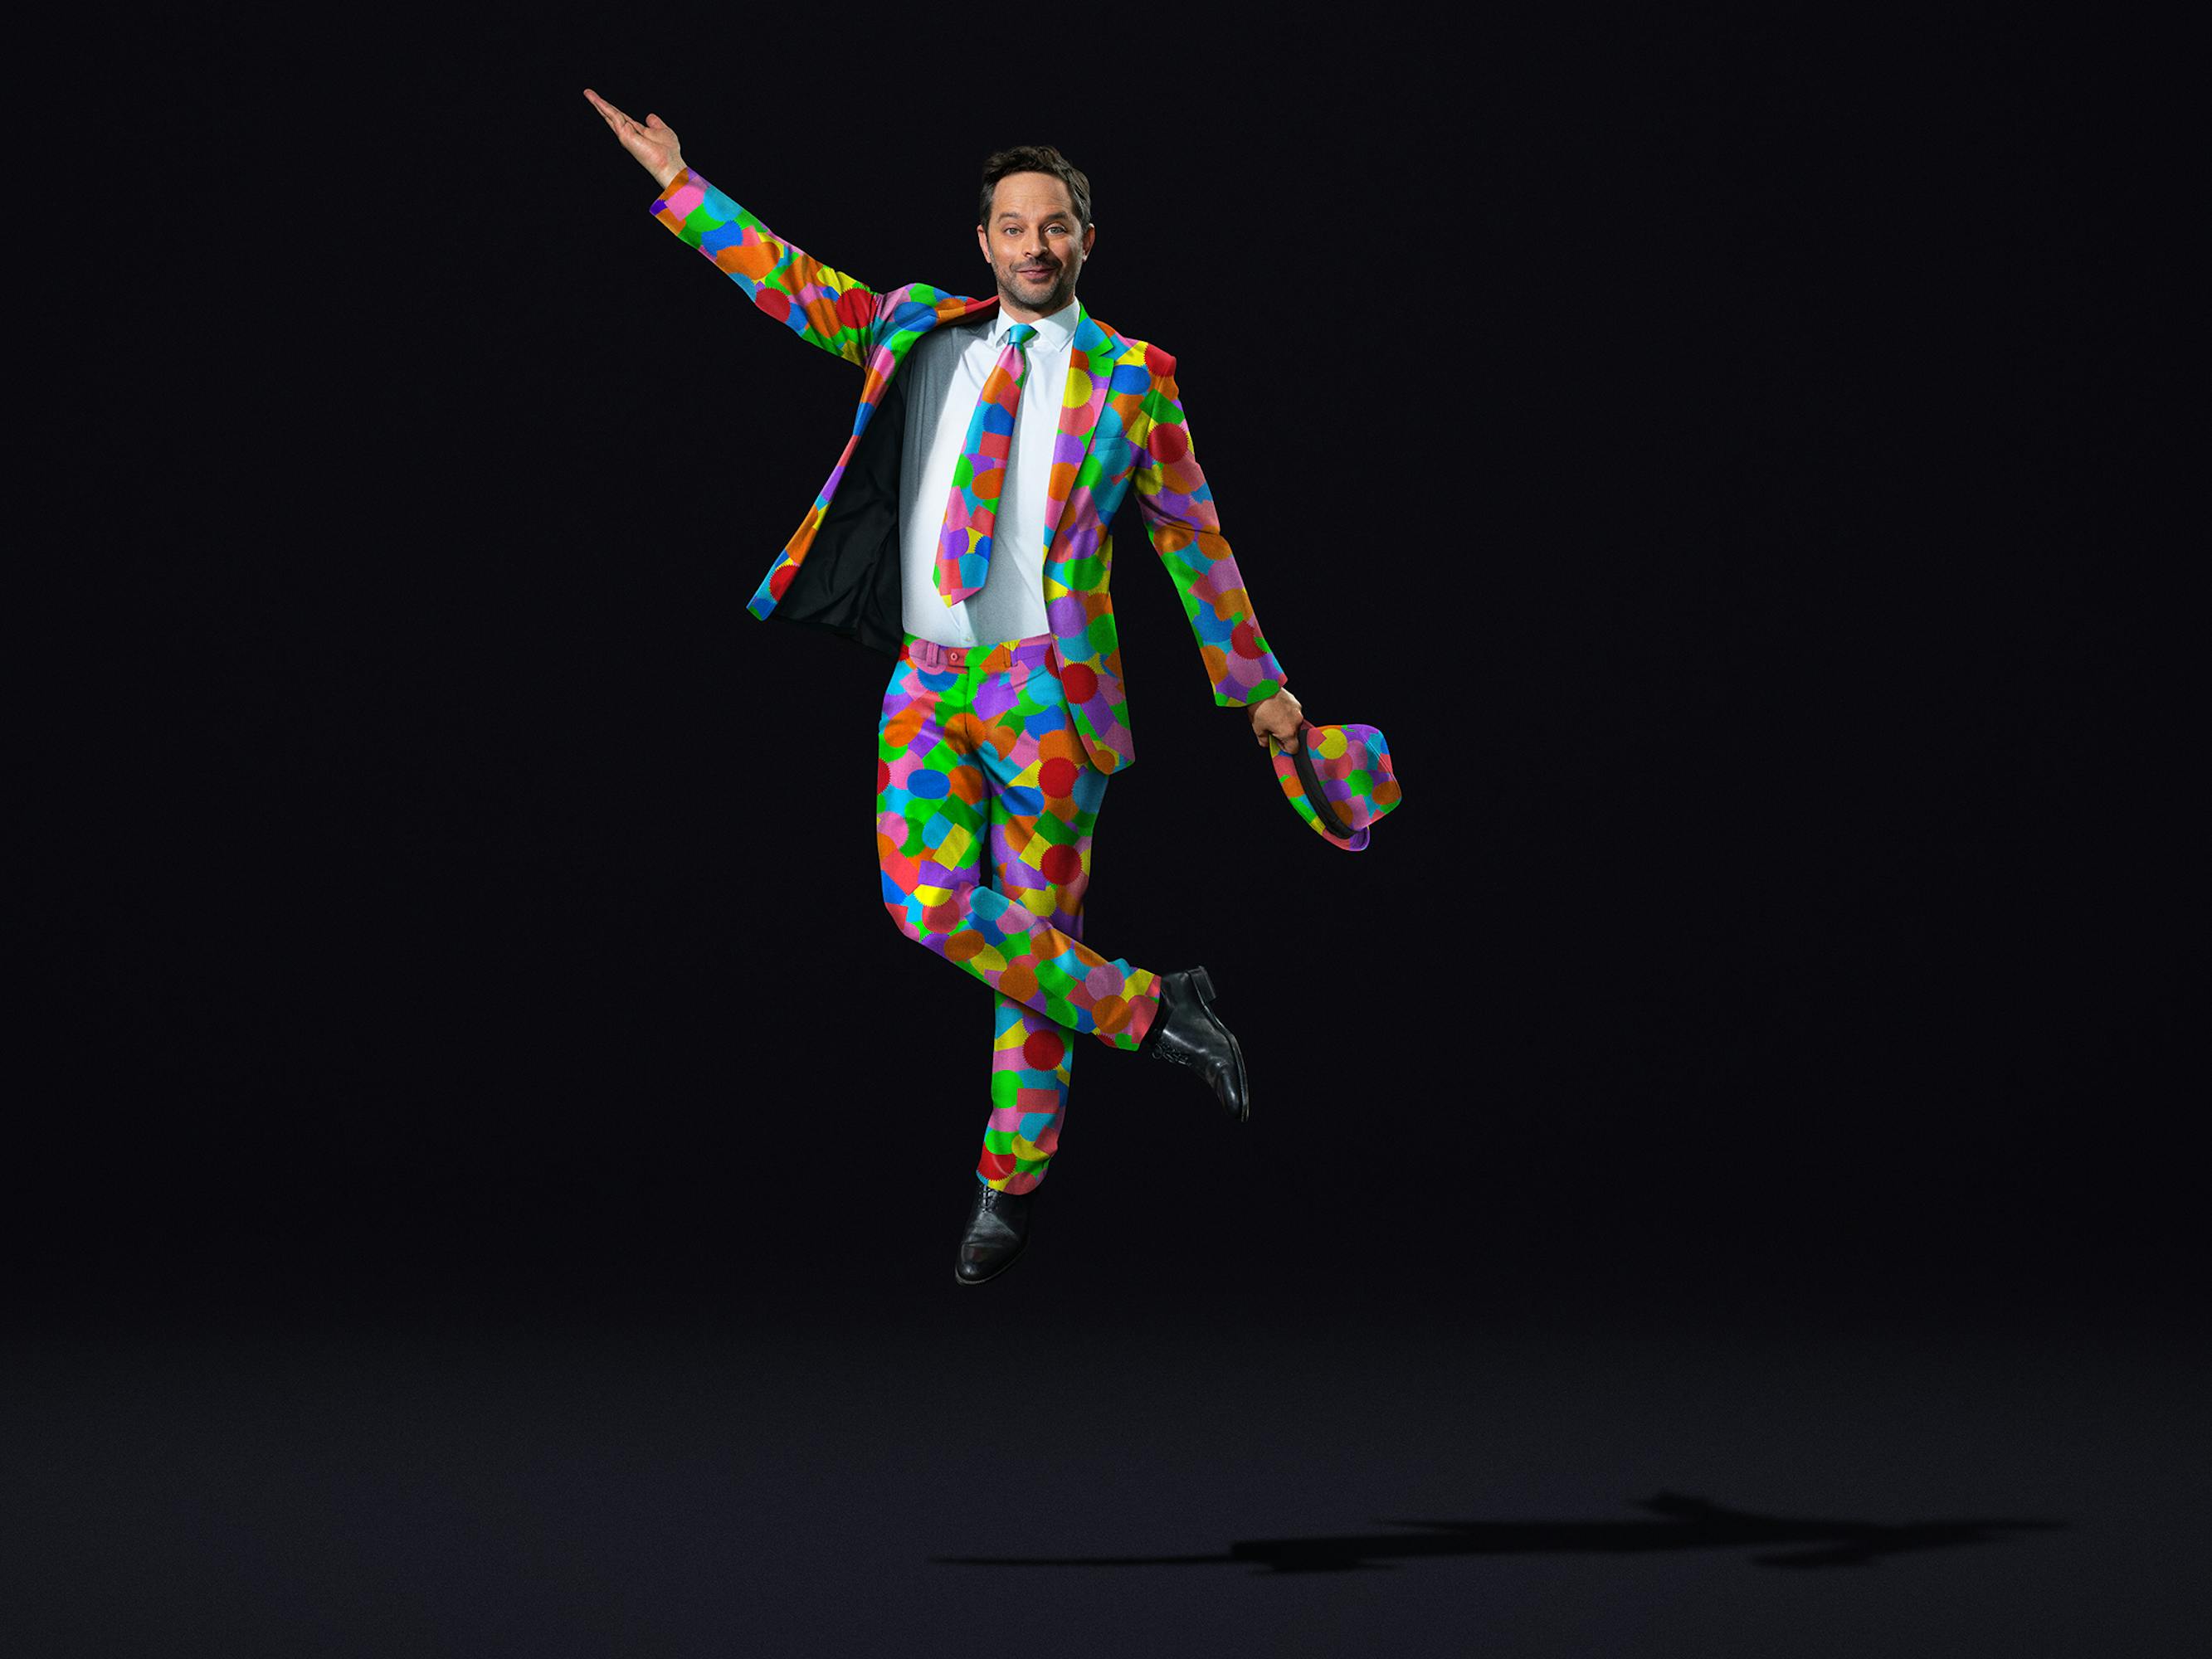 Nick Kroll wears a sticker suit and strikes a pose.